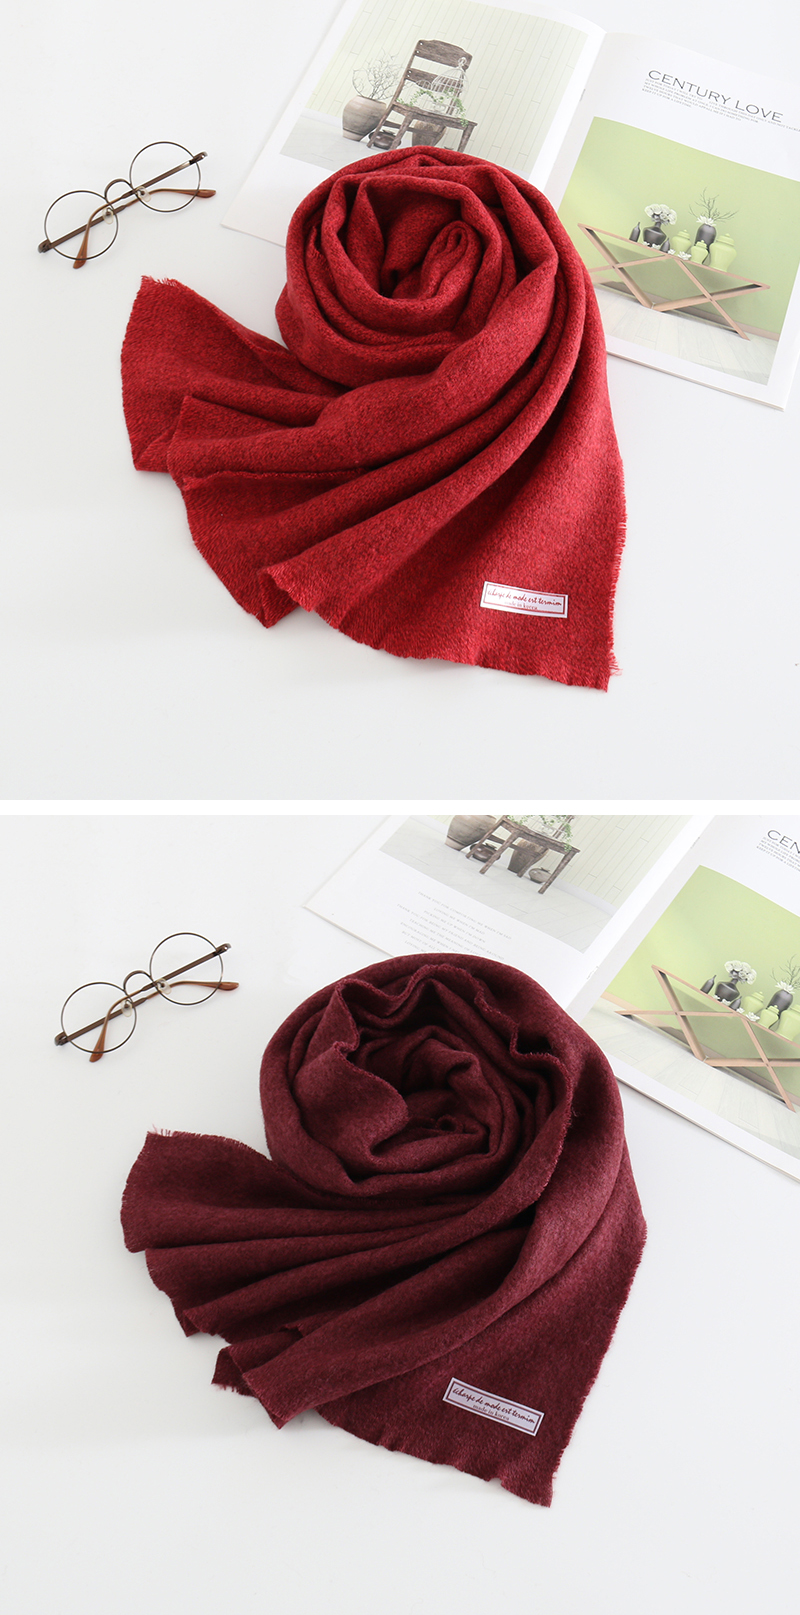 Fashion Light Grey Letter Clip Flower Monochrome Imitation Cashmere Loose Scarf,Thin Scaves